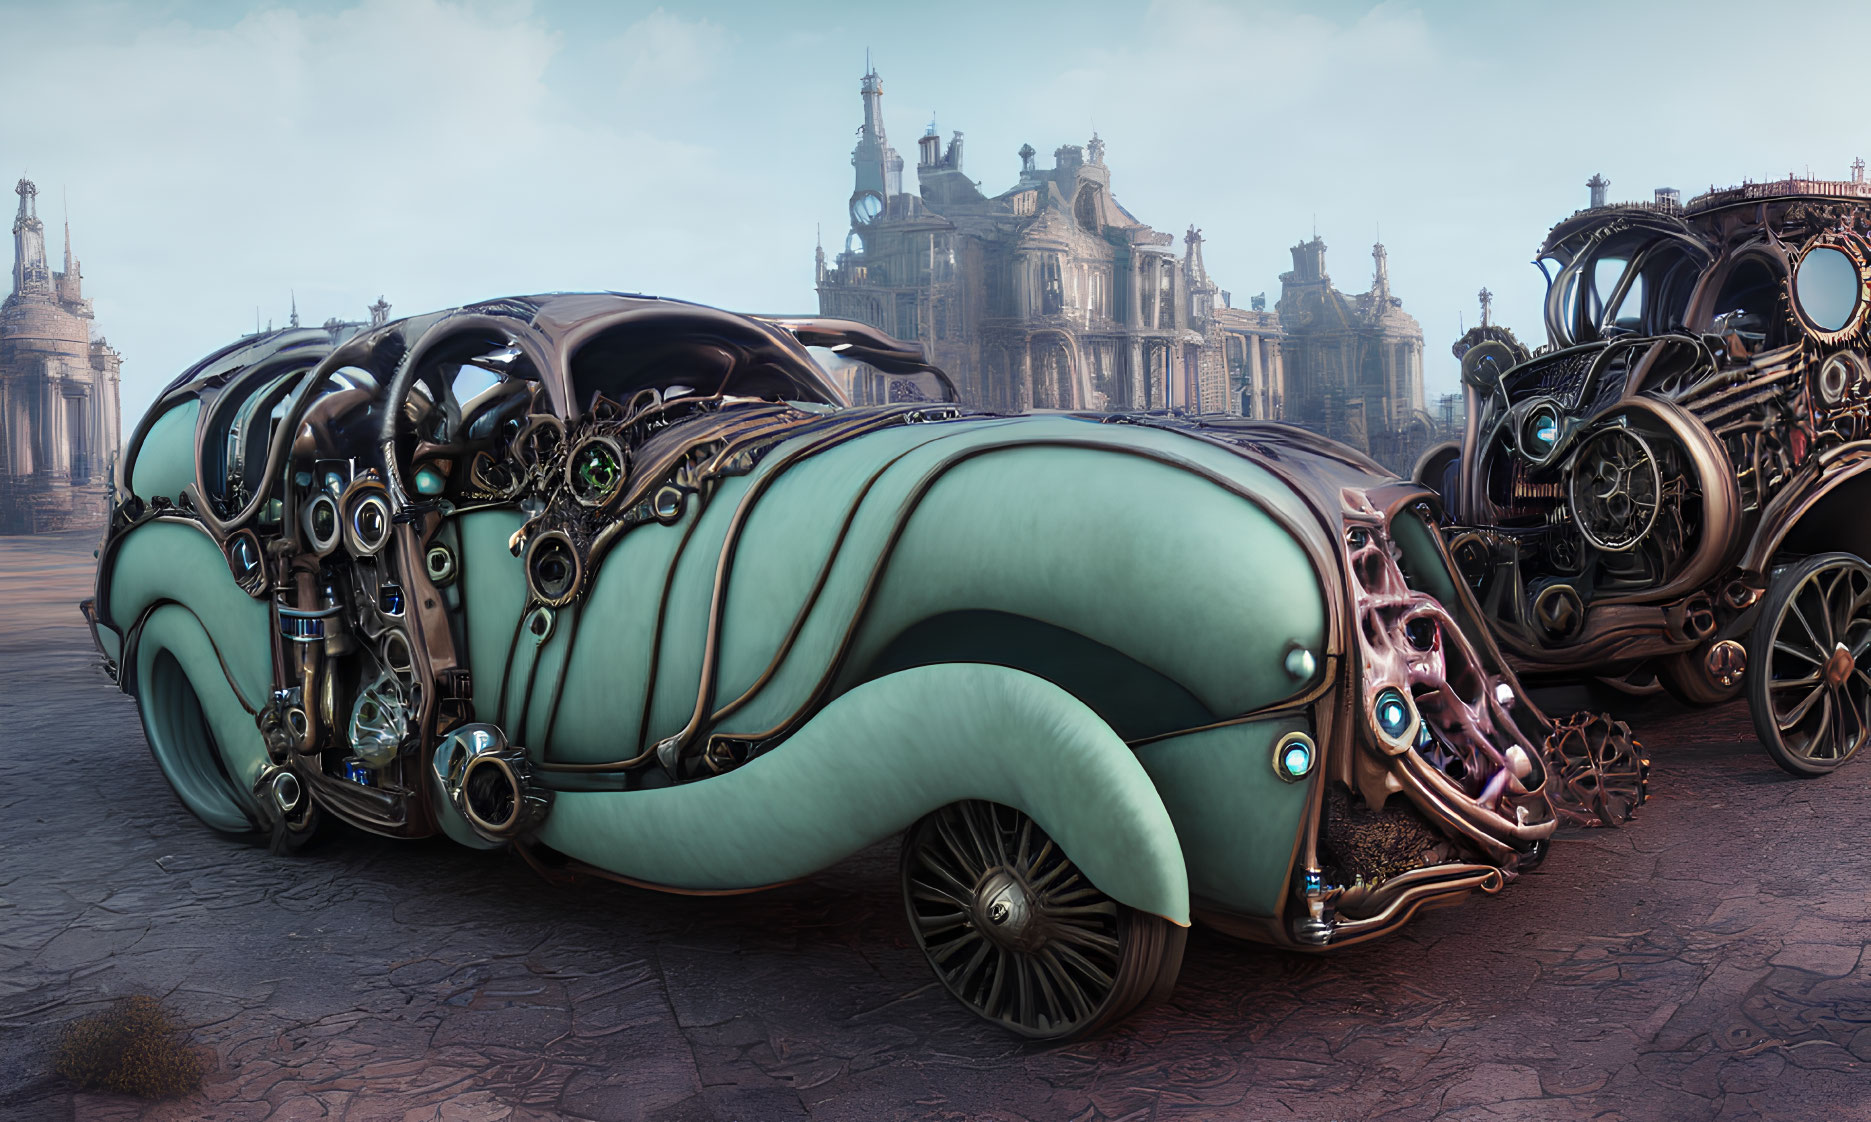 Steampunk-inspired futuristic vehicle against classical architecture